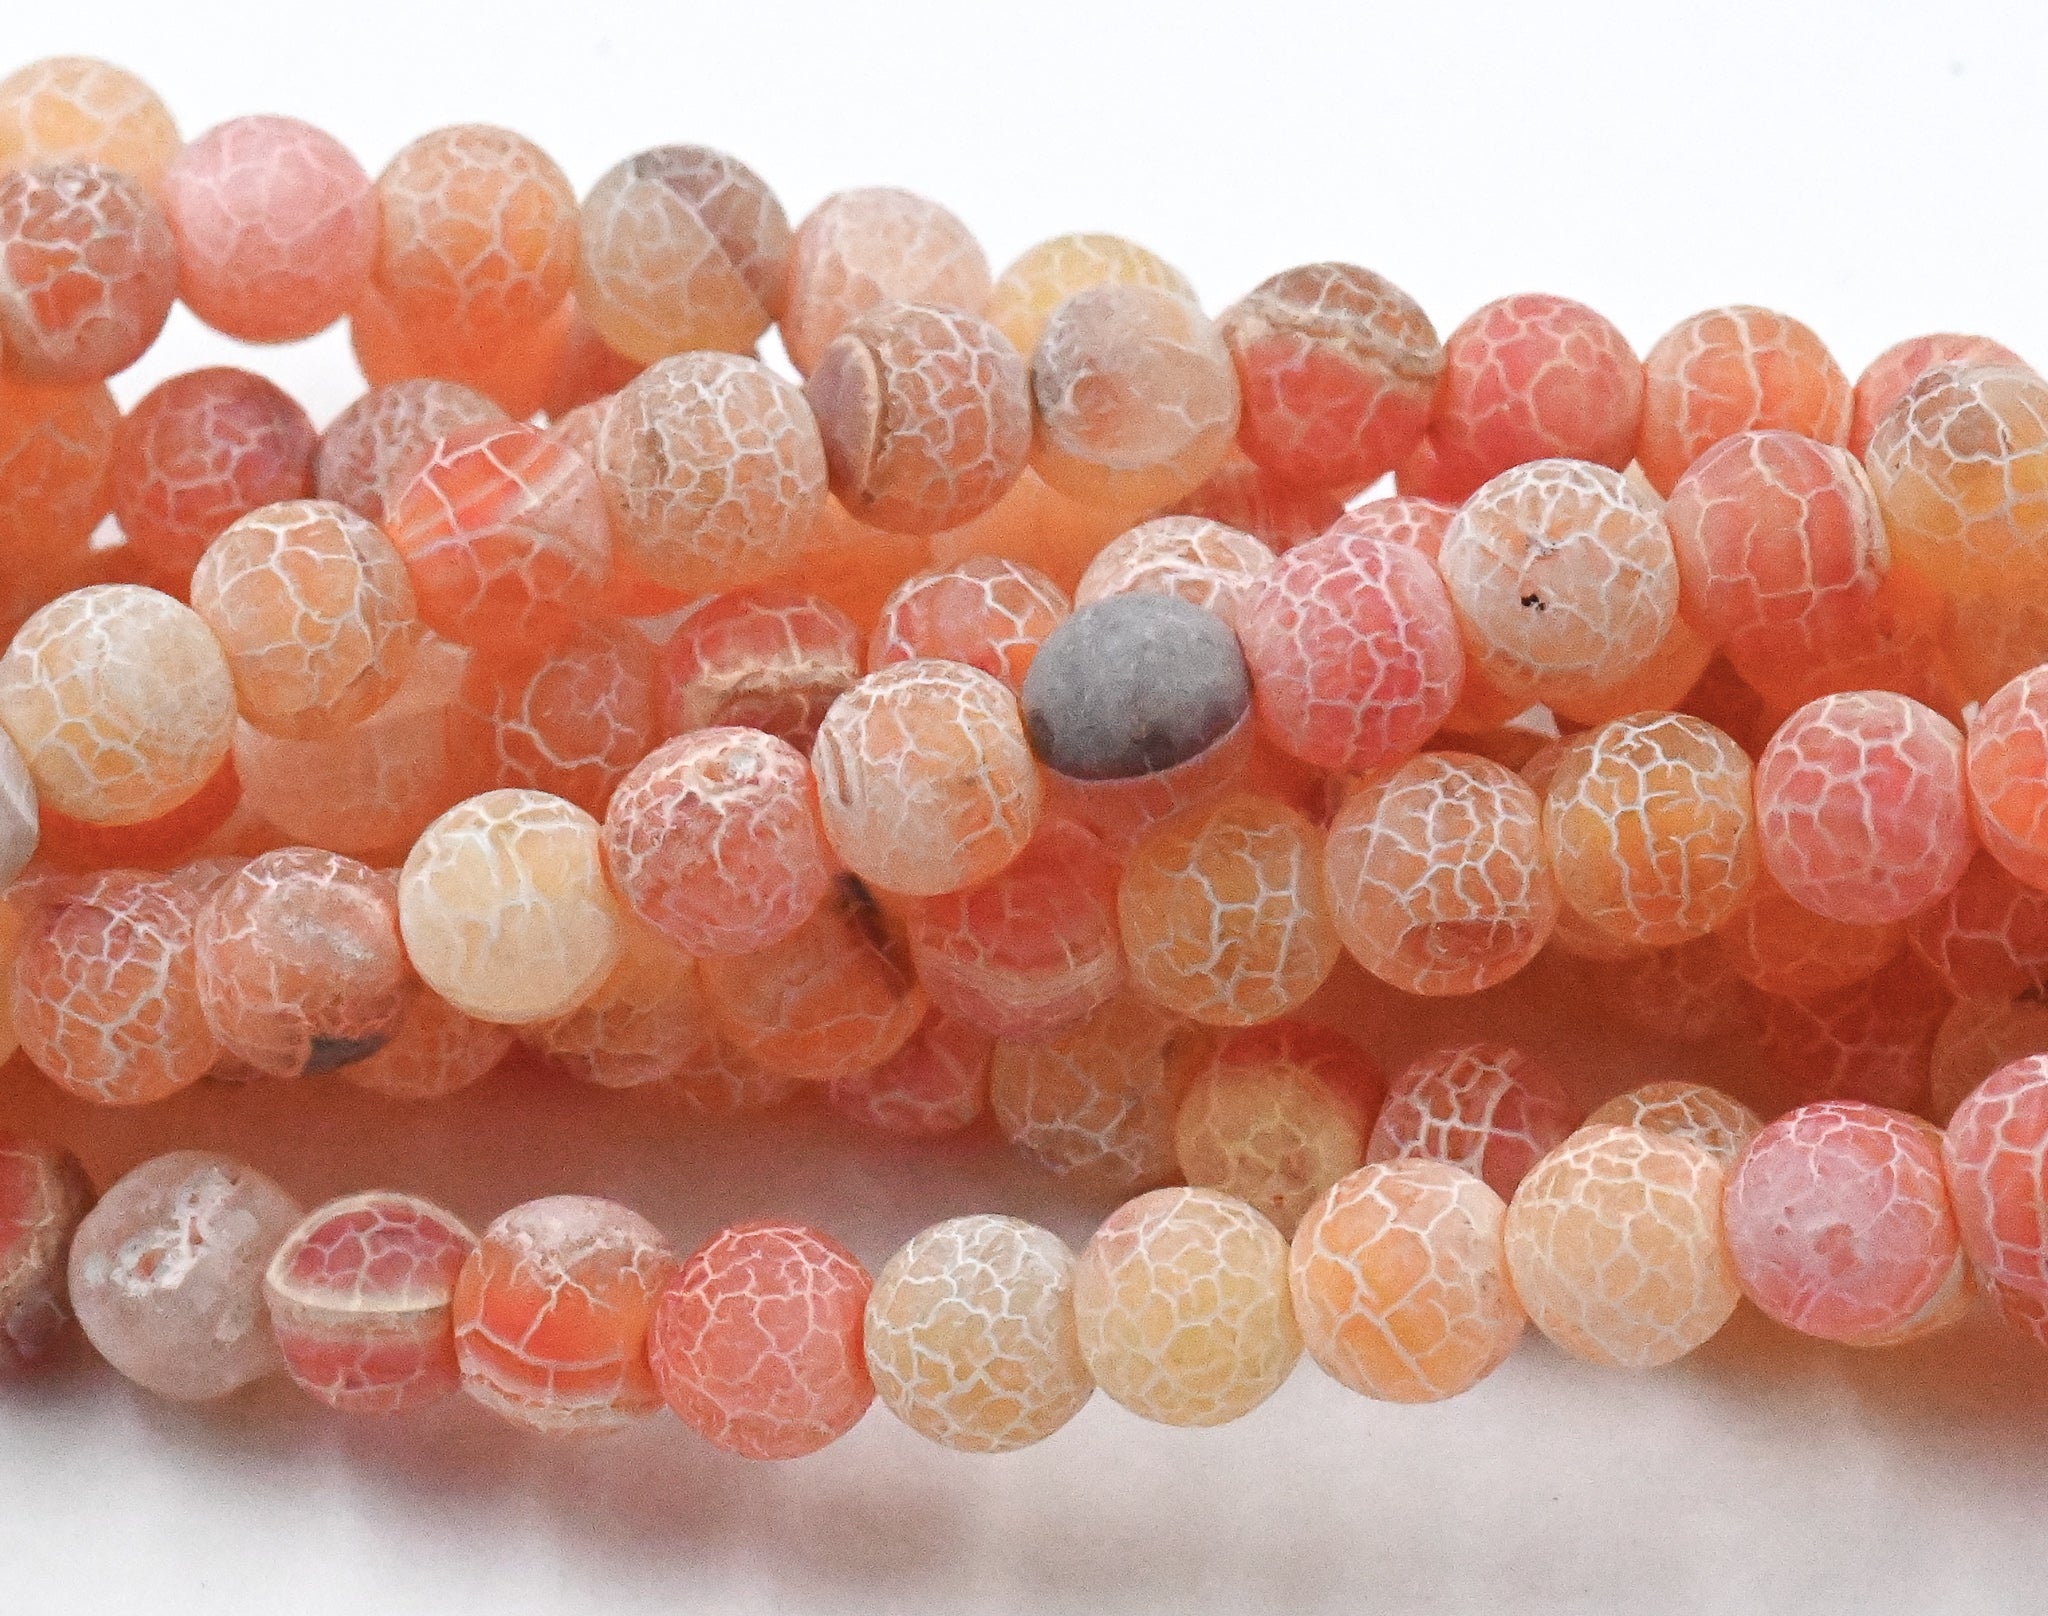 6mm Frosted Agate Round Beads in Orange Melon Coral  -14.25 inch strand